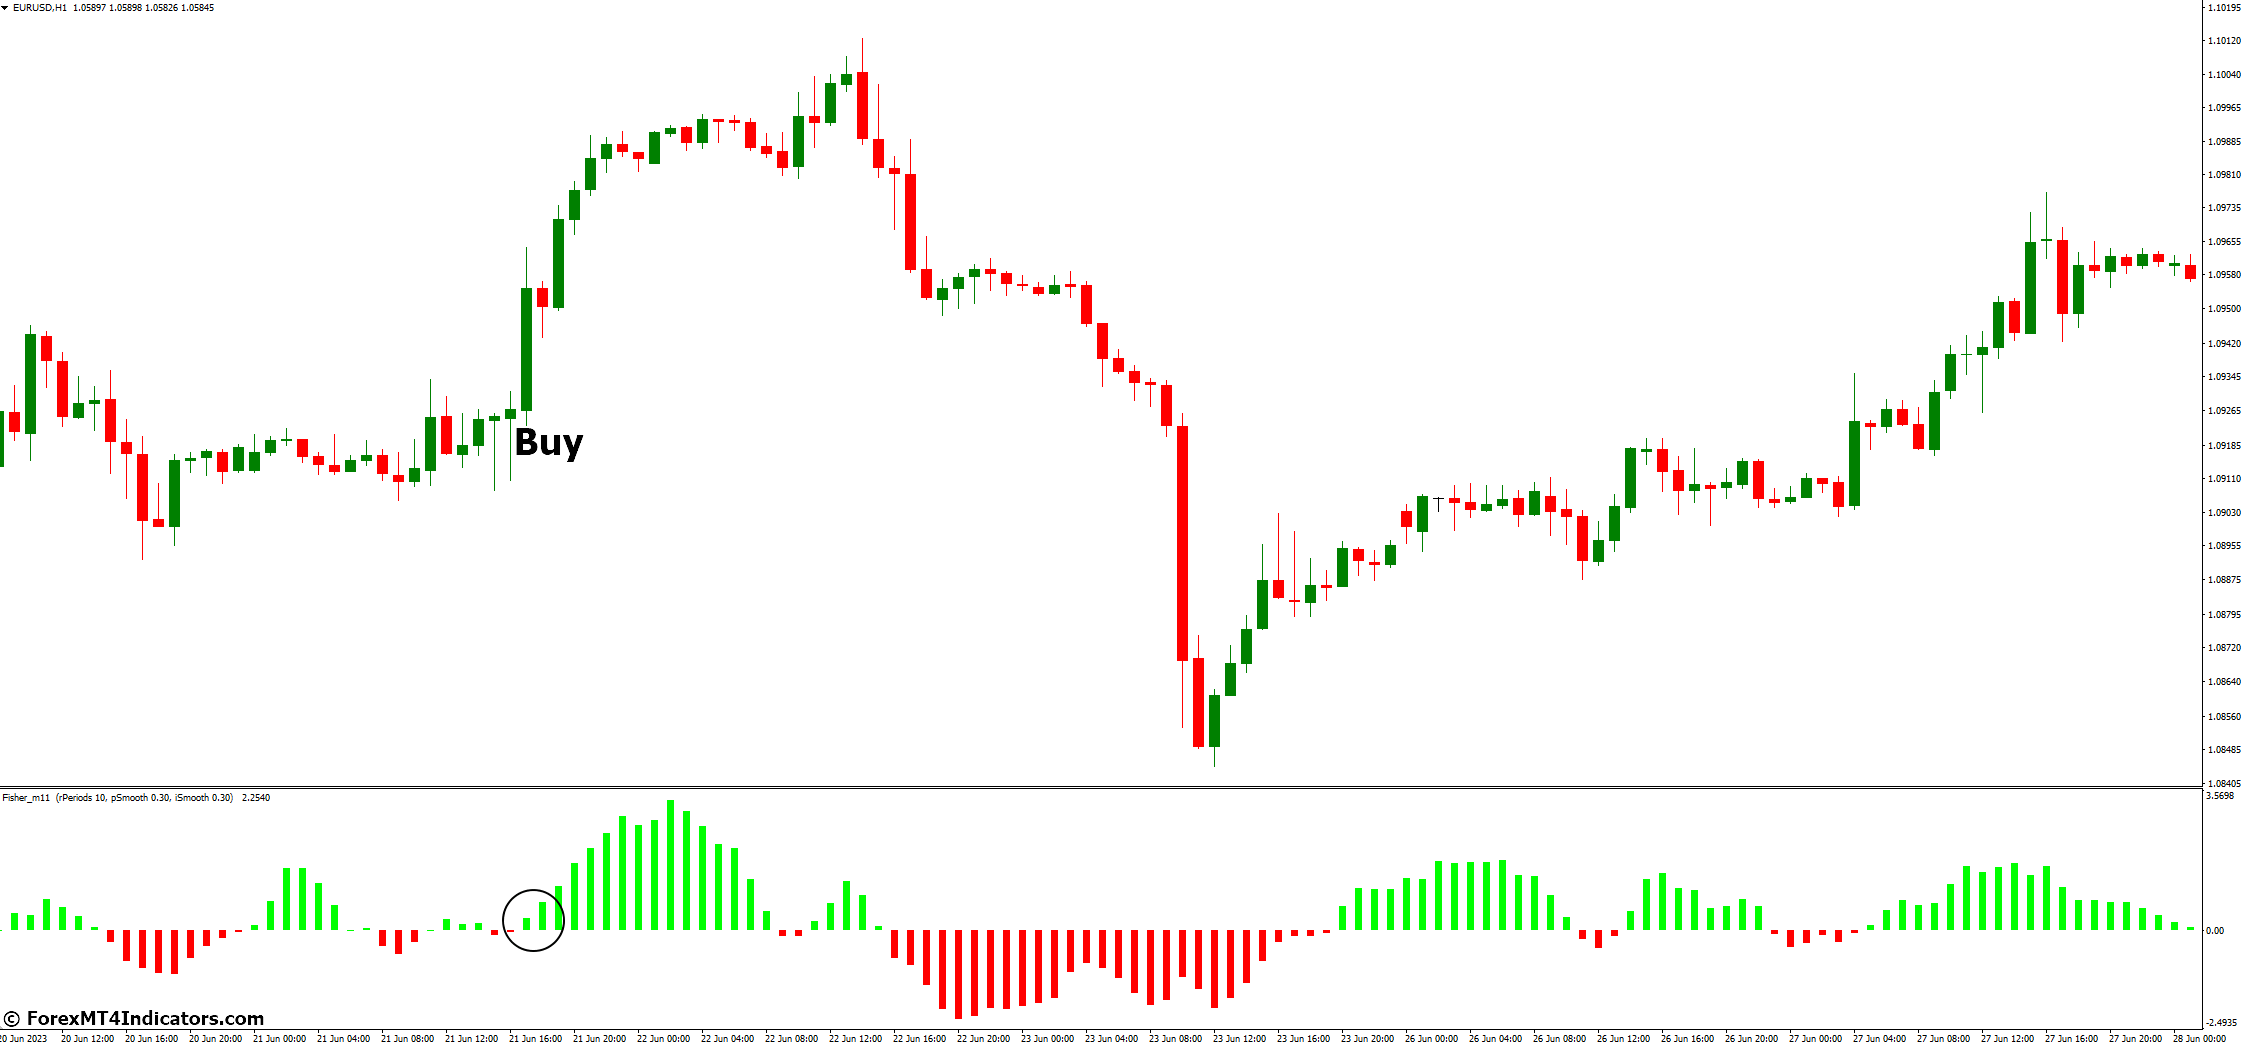 How to Trade with Fisher No Repainting MT4 Indicator - Buy Entry